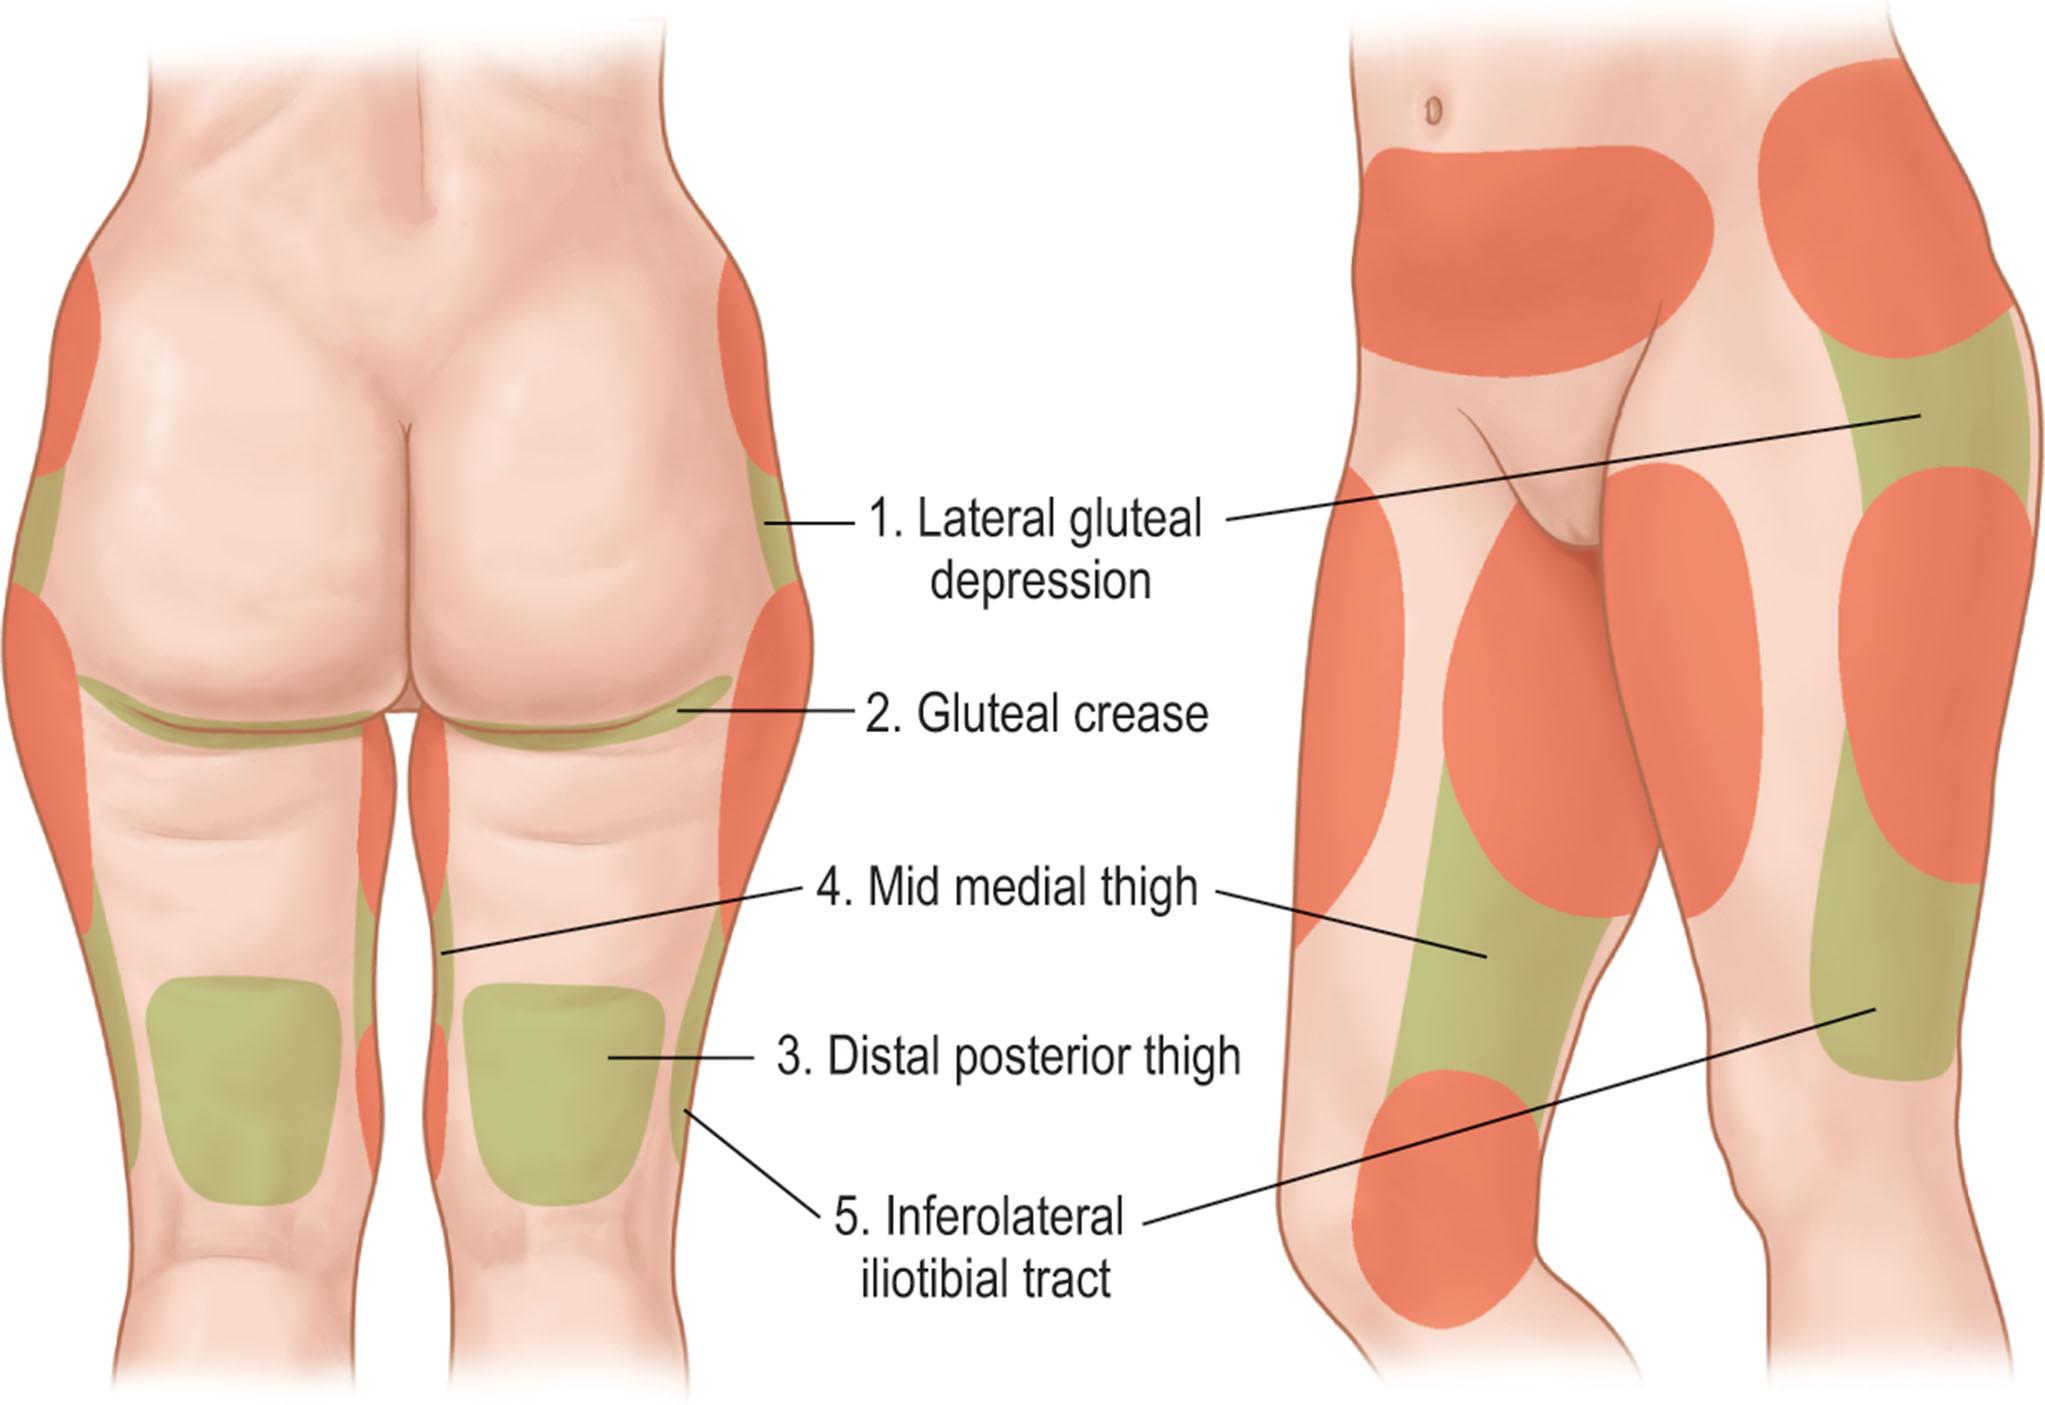 Figure 25.2.2, The zones of adherence are areas where the fibrous support structures of the subcutaneous fat and skin are adherent to the underlying deep fascia. These attachments create adherence and depressions contributing shape of the body's surface.